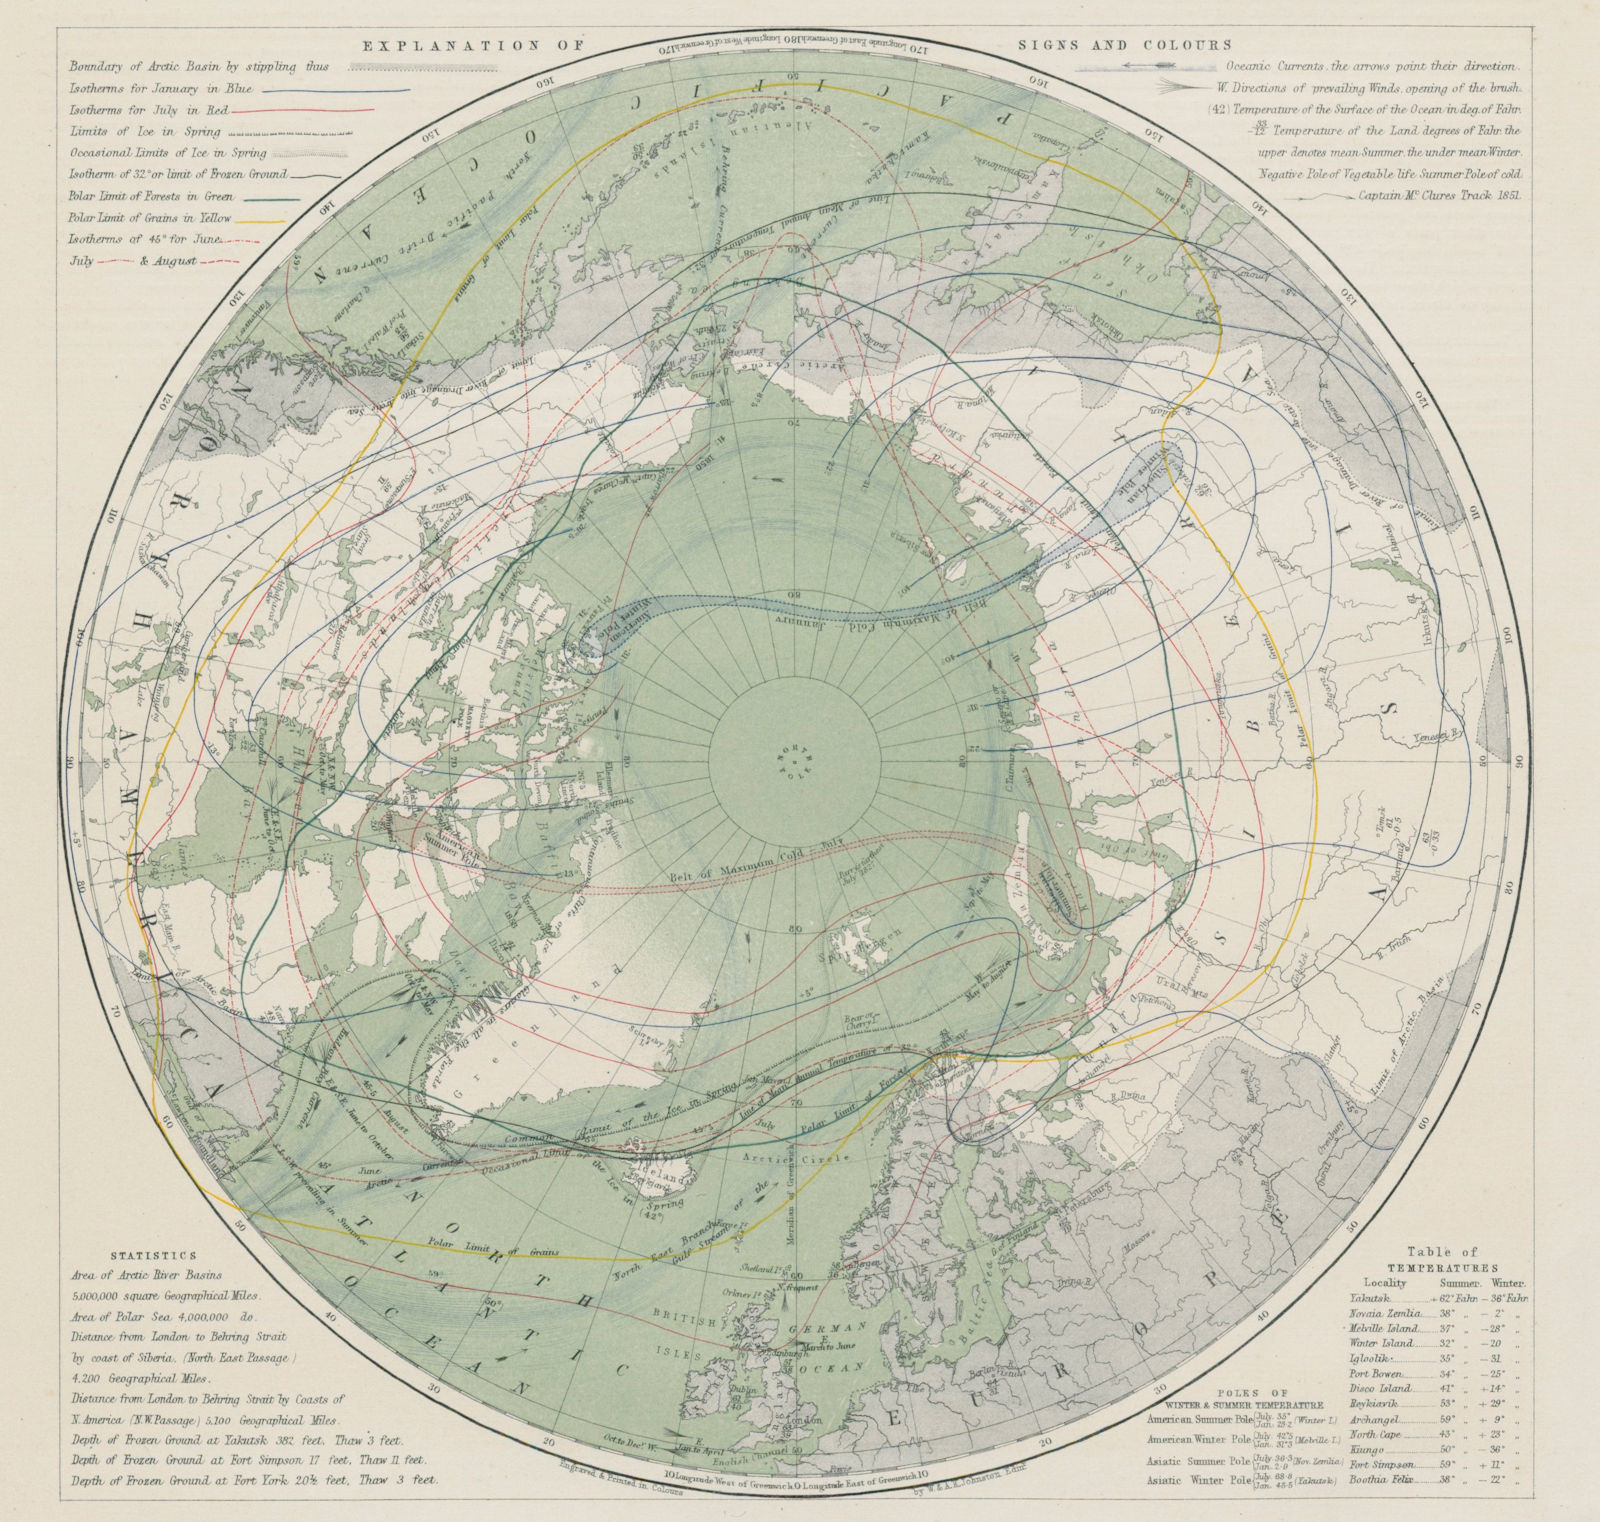 Arctic Basin currents winds climates. Northern Hemisphere. North pole 1856 map